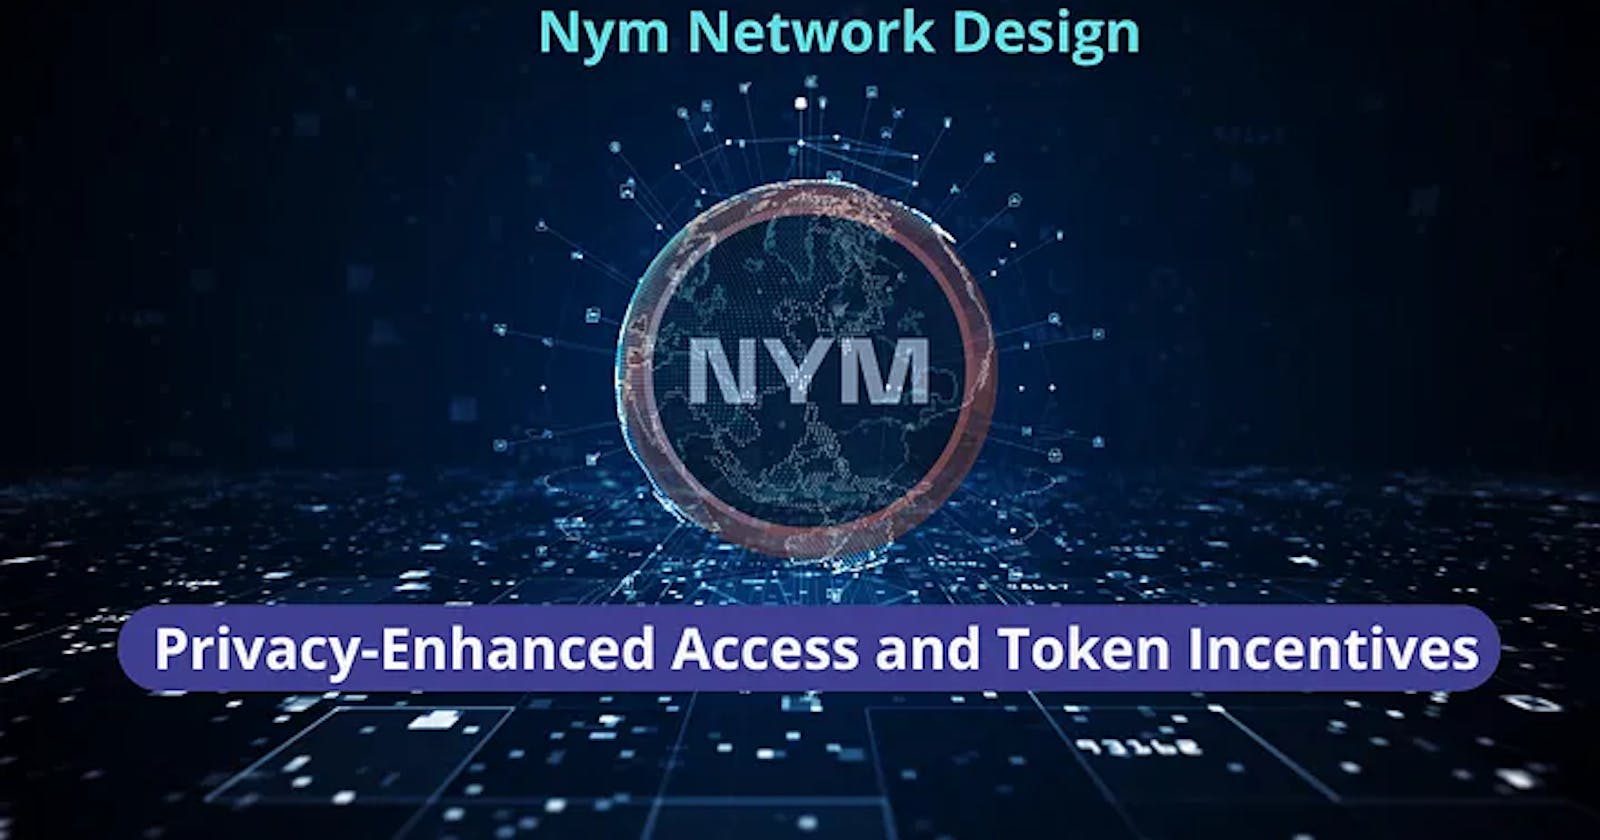 Nym Network Design: Privacy-Enhanced Access and Token Incentives